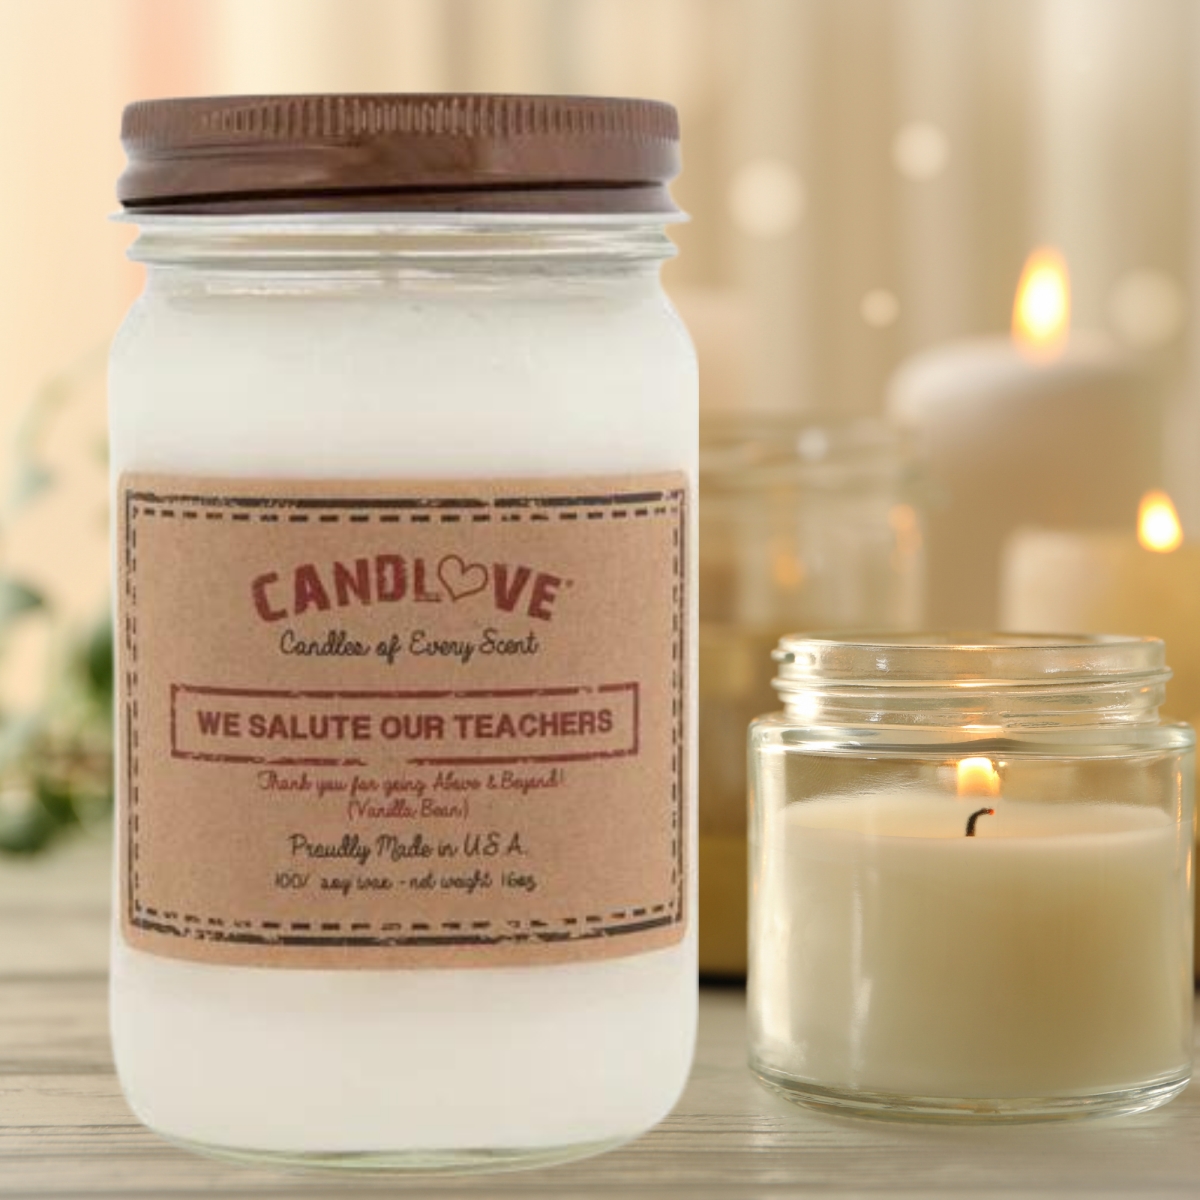 Picture of PPI SUPPLIES Vanilla-T-C Candlove Vanilla We Salute Teachers Scented Candle - Non-Toxic 100% Soy Candle - Handmade & Hand Poured Long Burning Candle - Highly Scented All Natural Clean Burning Candle (16 OZ Mason Jar) Made in The USA